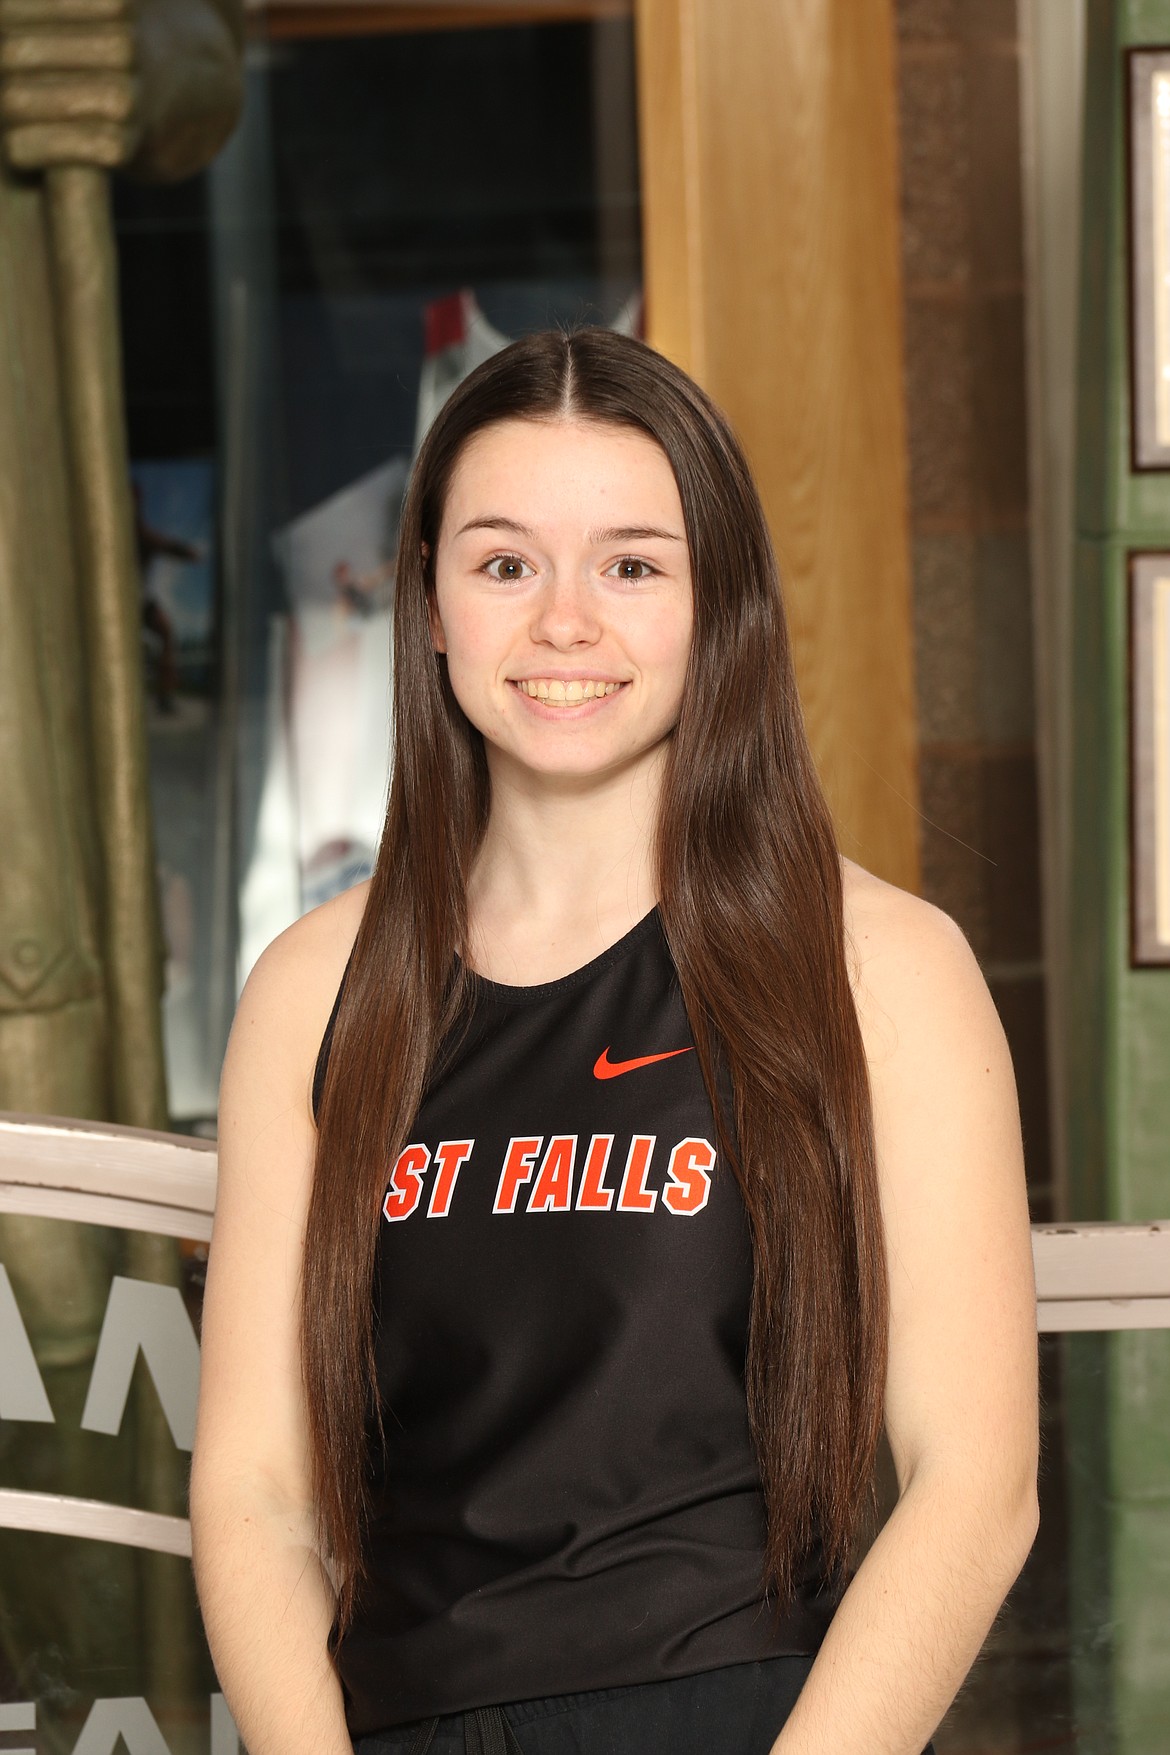 Courtesy photo
Senior track and field athlete Amy Madsen is this week's Post Falls High School Athlete of the Week. Madson won the 5A girls pole vault at last week's Region 1 meet with a personal-best vault of 10 feet, 7 inches.